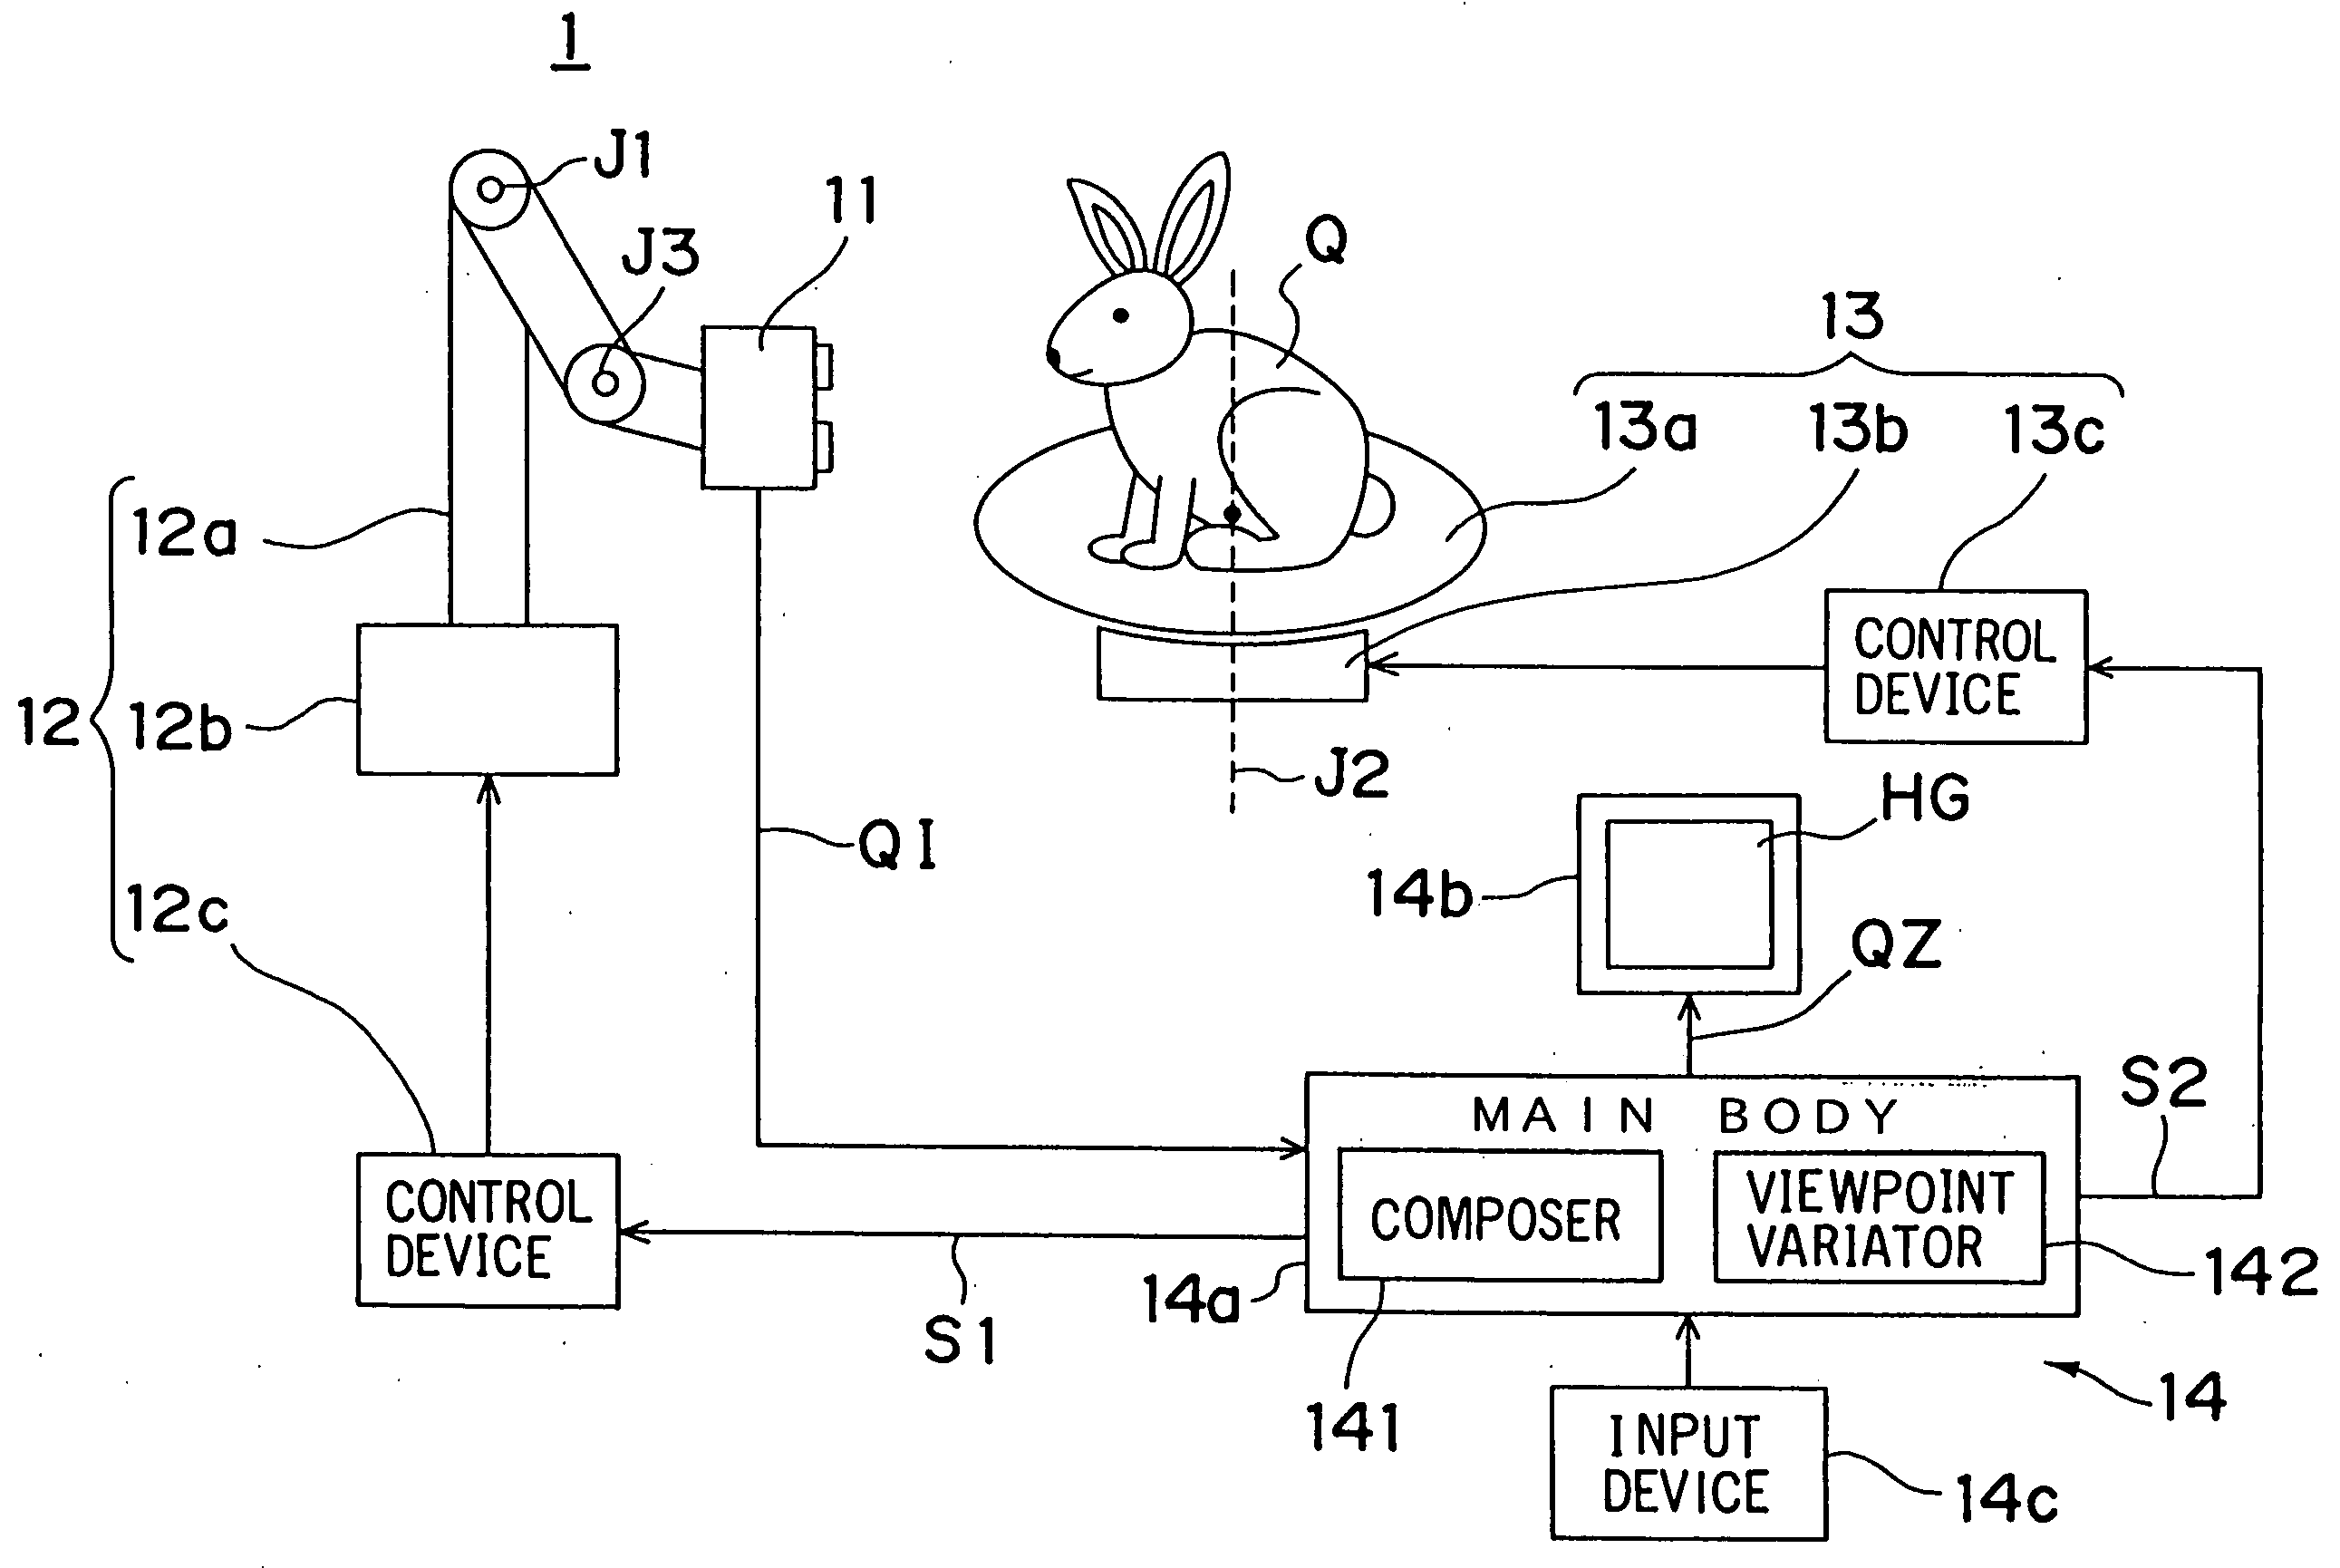 Apparatus for obtaining data on the three-dimensional shape